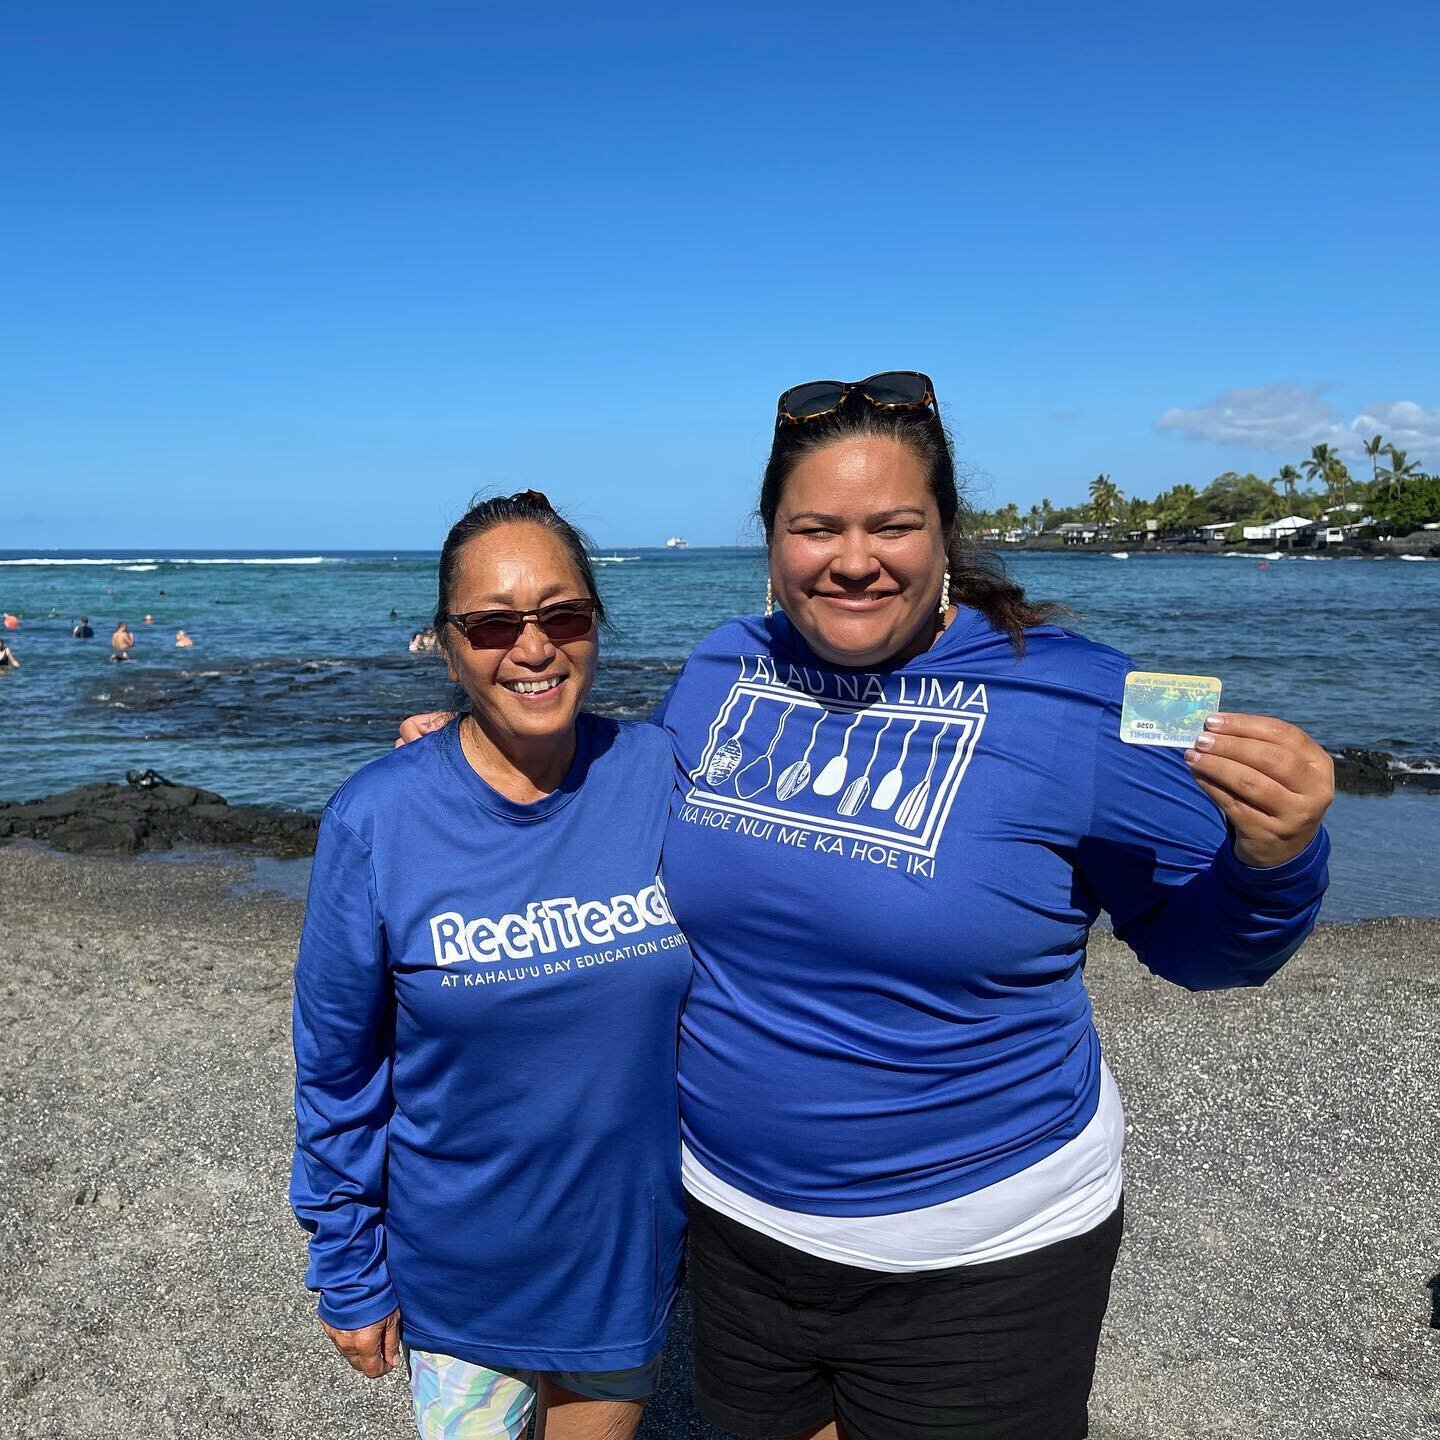 I had a great morning with Cindi Punihaole and the team at Kahaluʻu Bay Education Center. There&rsquo;s so much amazing stewardship happening here to protect our reefs and educate all visitors. A new parking fee started on 12/1 and I encourage all ka